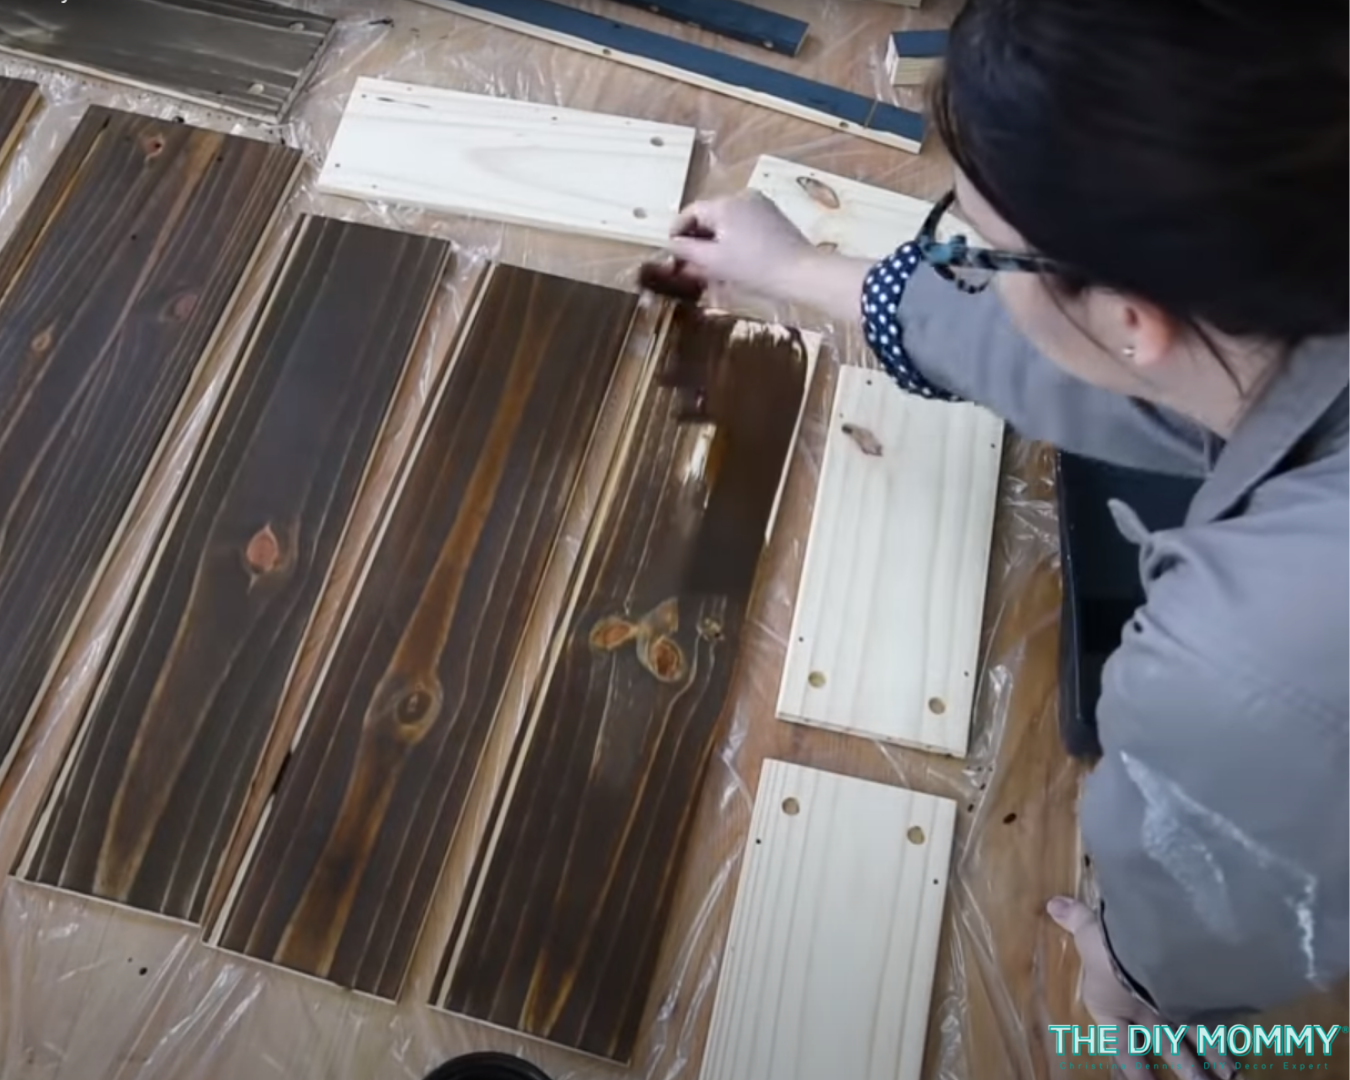 Using an age accelerator wood stain on the front and sides of the drawers